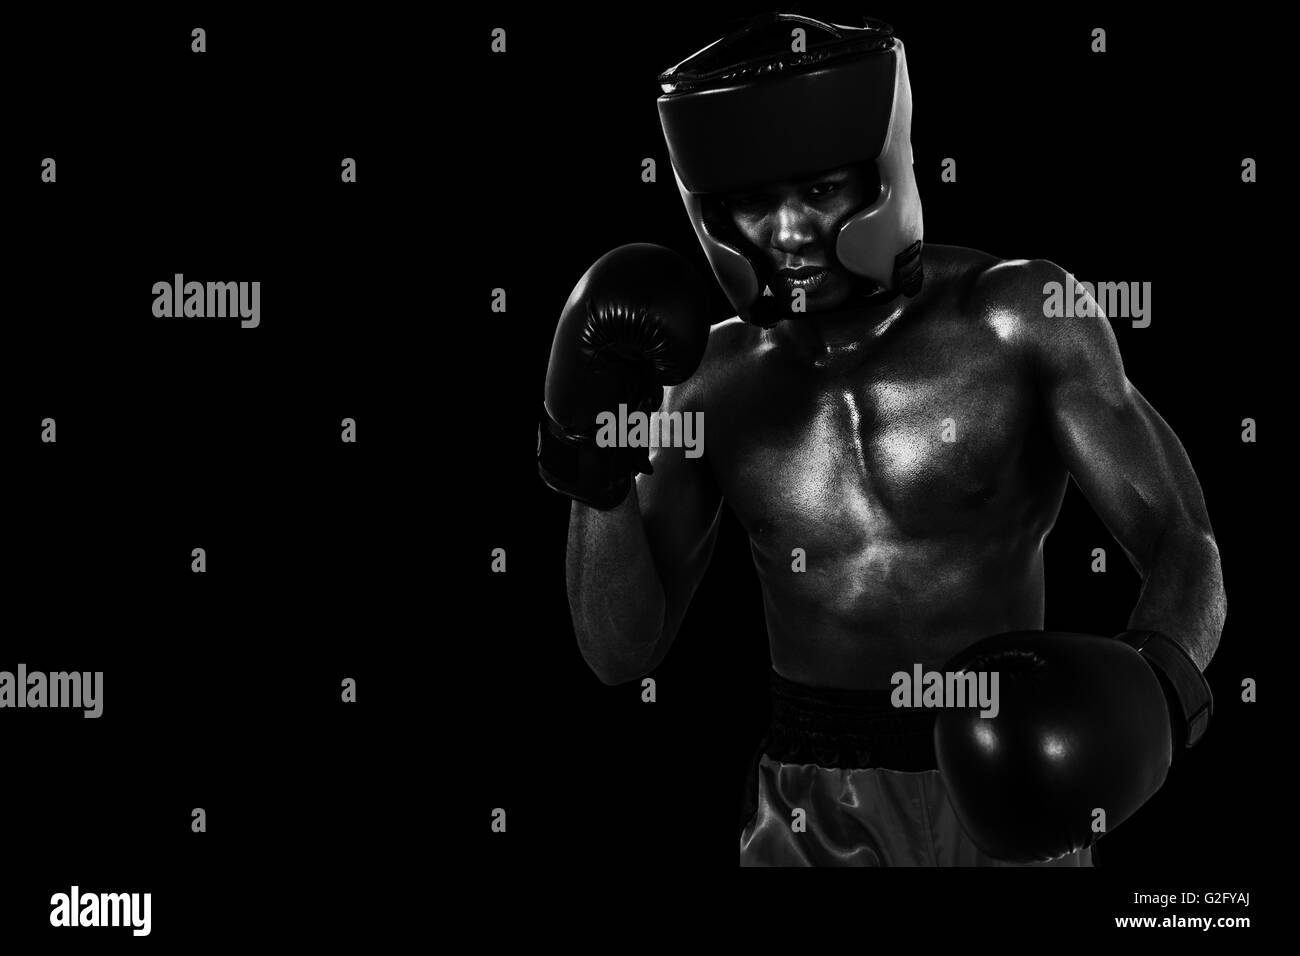 Composite image of boxer performing boxing stance Stock Photo